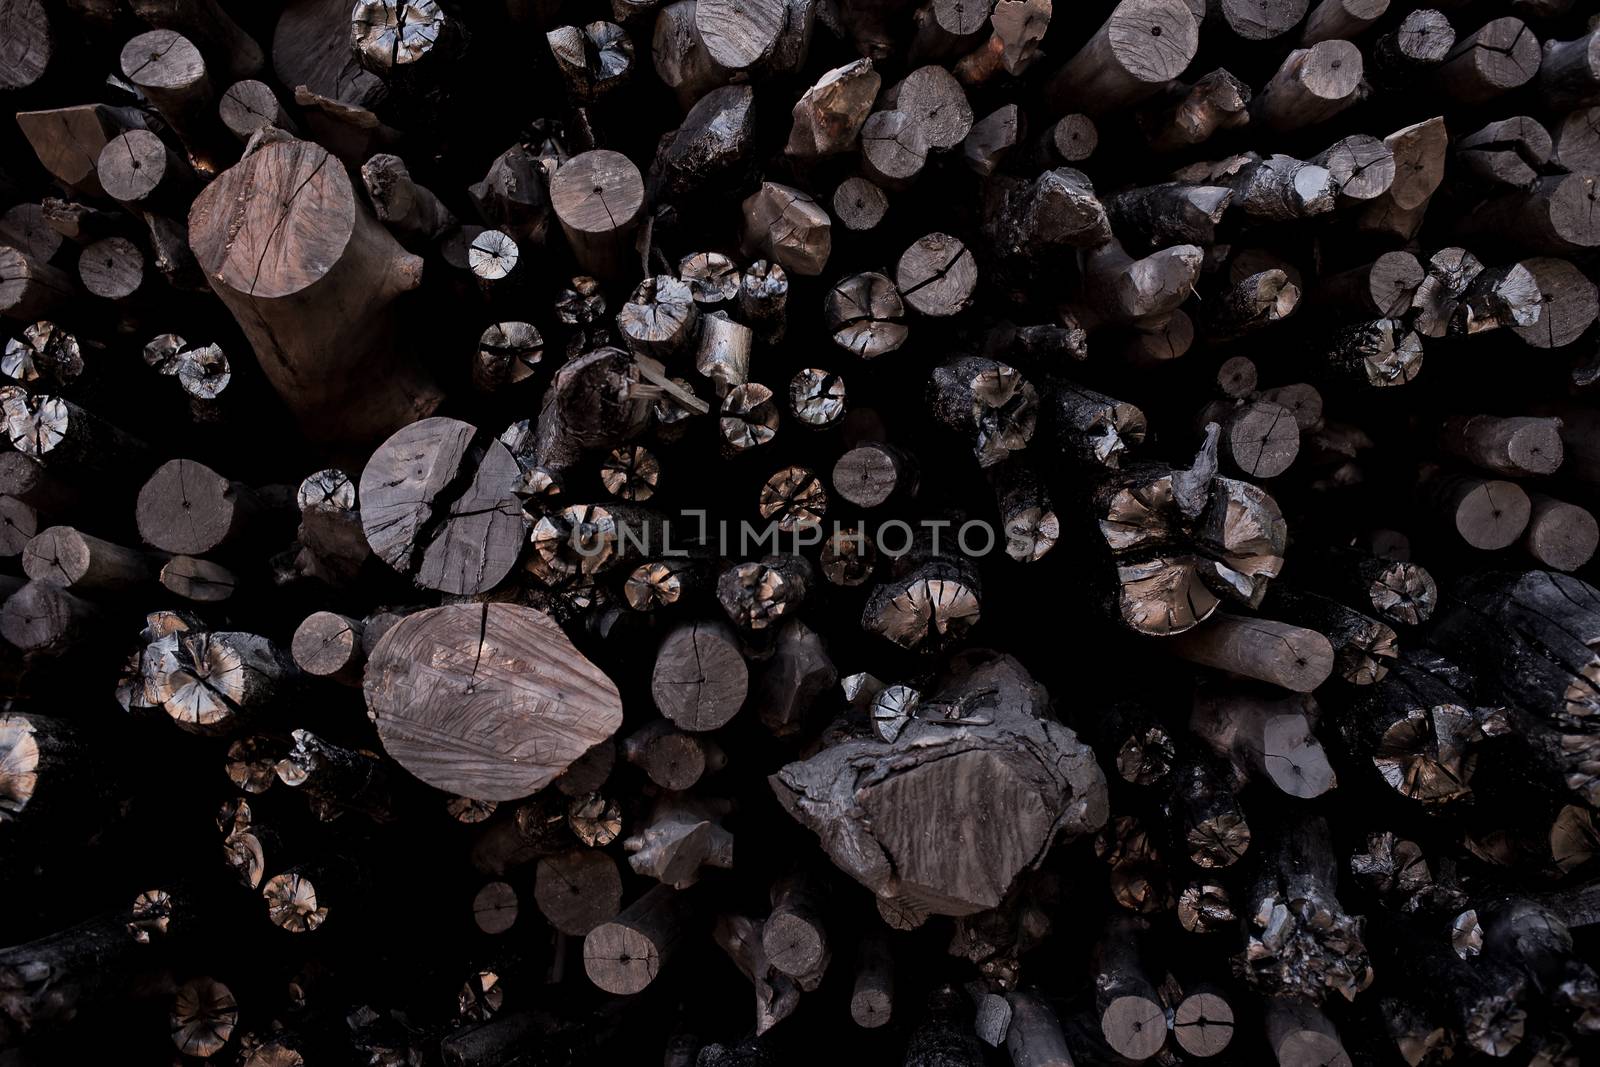 Natural wood charcoal, traditional charcoal or hard wood charcoal.